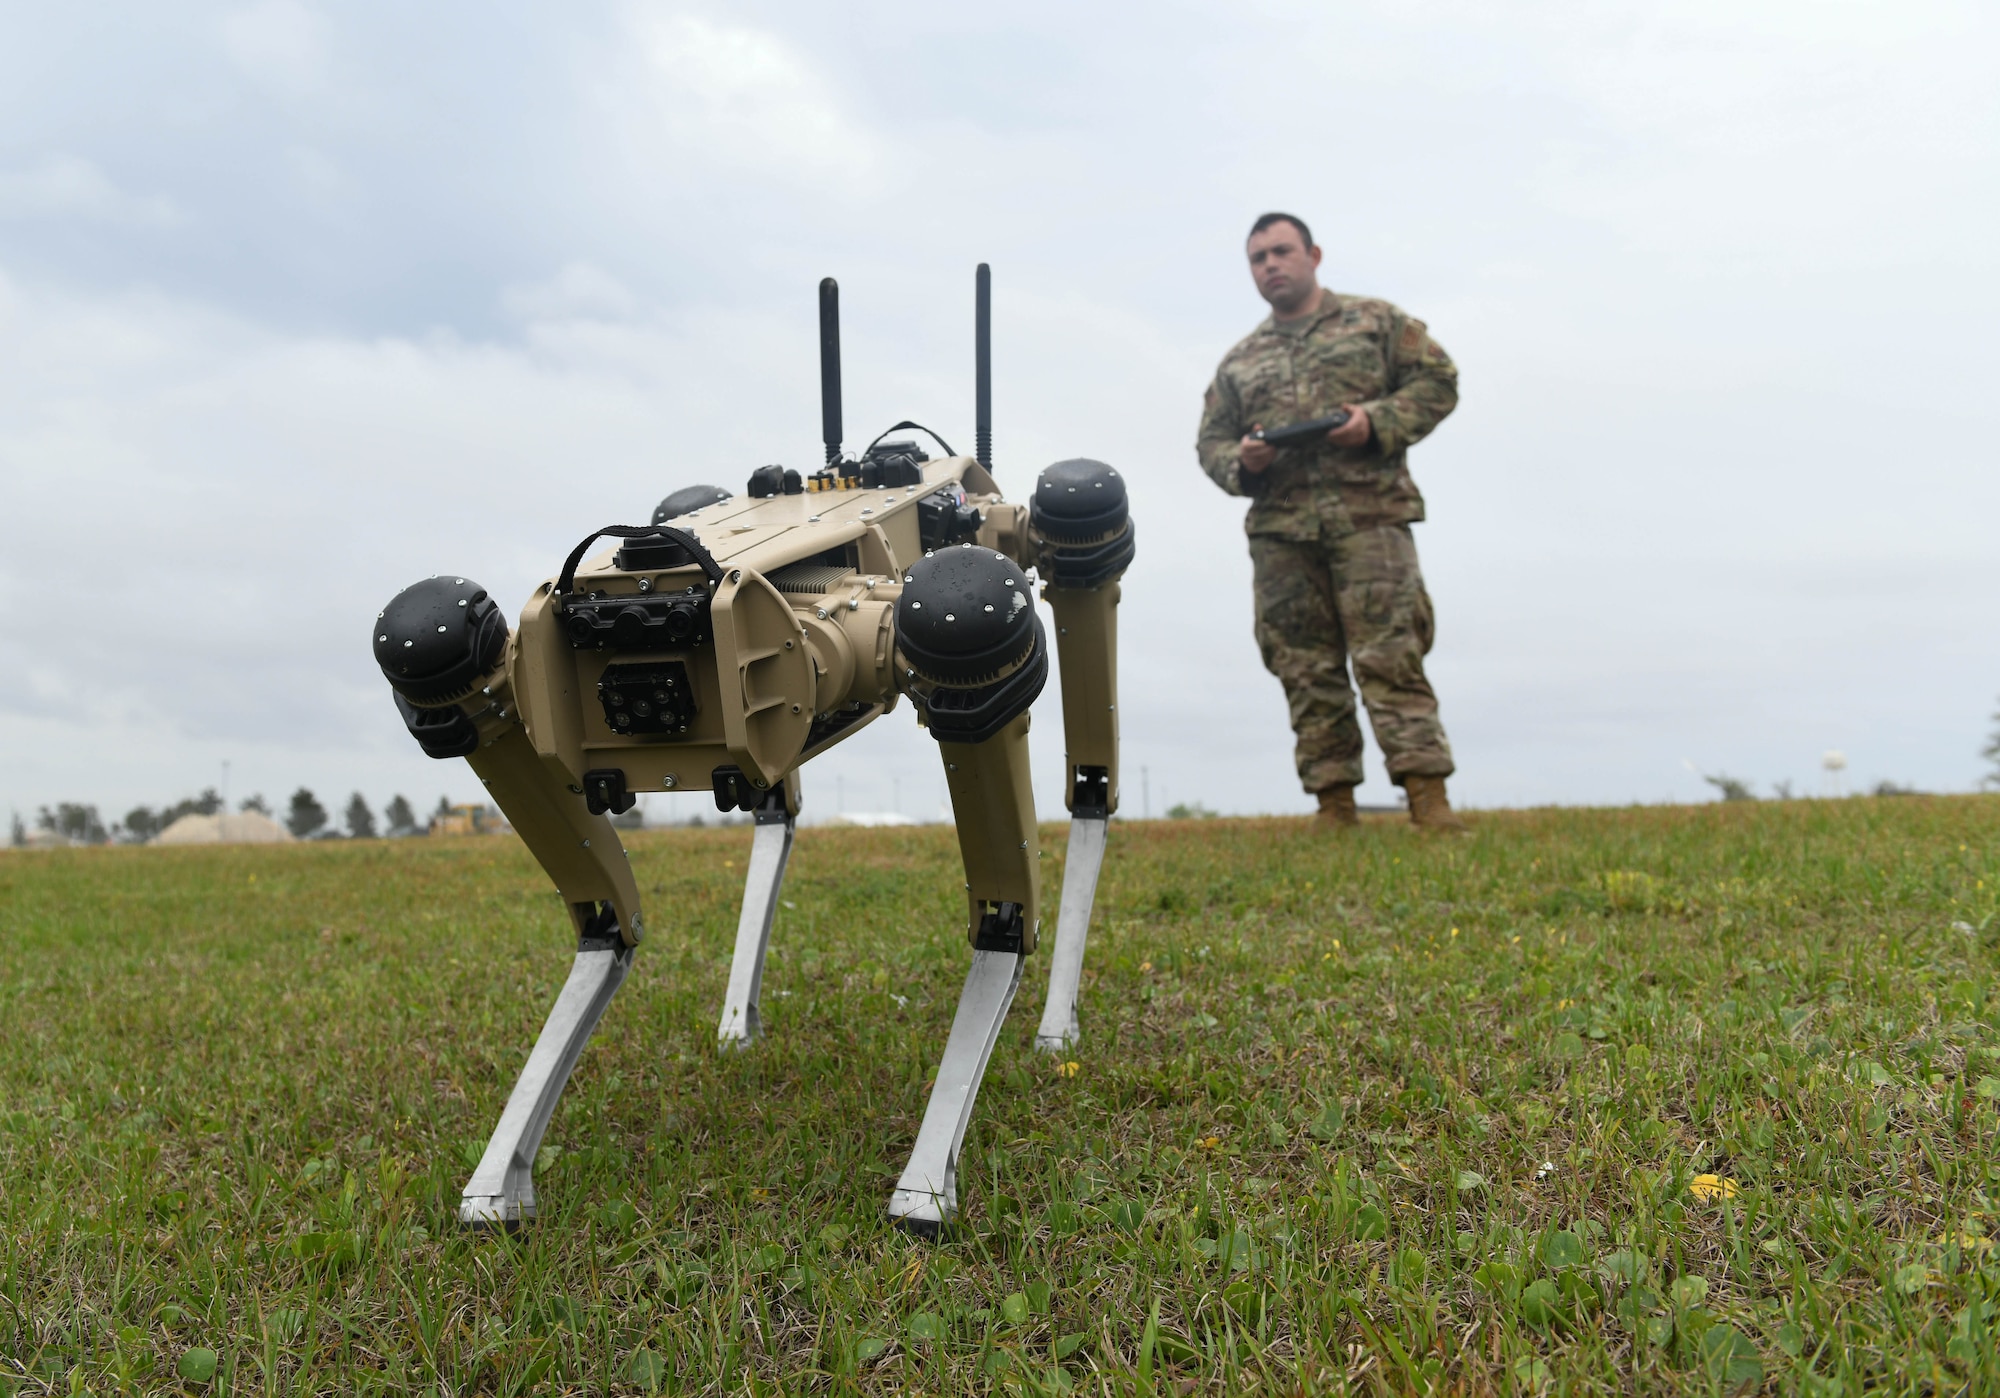 Master Sgt. Krystoffer Miller, 325th Security Forces Squadron operations support superintendent, operates a Quad-legged Unmanned Ground Vehicle at Tyndall Air Force Base, Fla., March 24, 2021. The purpose of the Q-UGV is to add an extra level of protection to base. (U.S. Air Force photo by Airman 1st Class Anabel Del Valle)